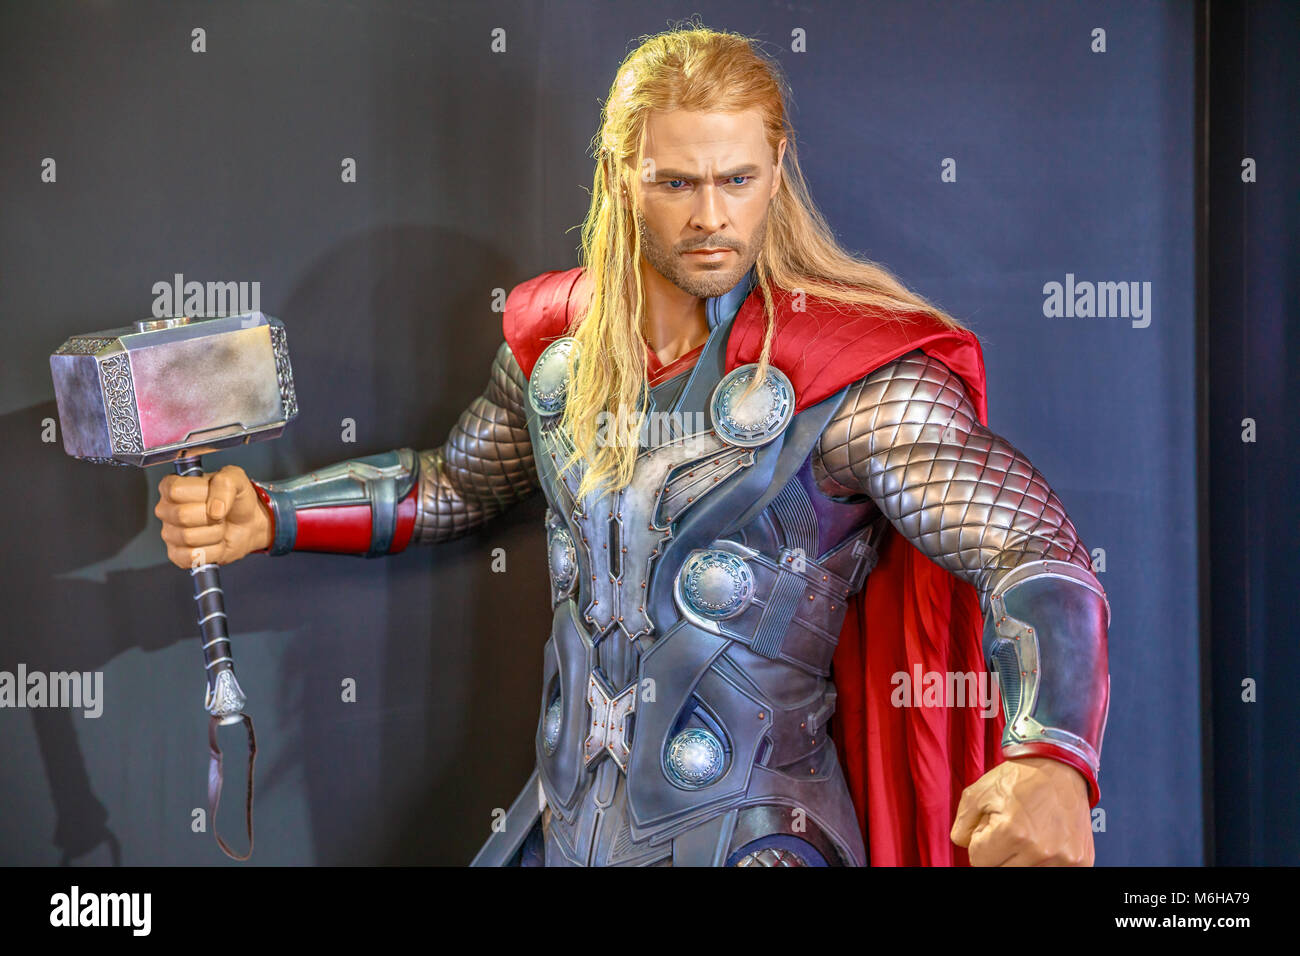 Tokyo, Japan - April 20, 2017: portrait of Thor Chris Hemsworth, God of Thunder, model with an enchanted hammer Mjolnir, from Age of Heroes movie at Mori Tower, Roppongi Hills complex, Minato Tokyo. Stock Photo